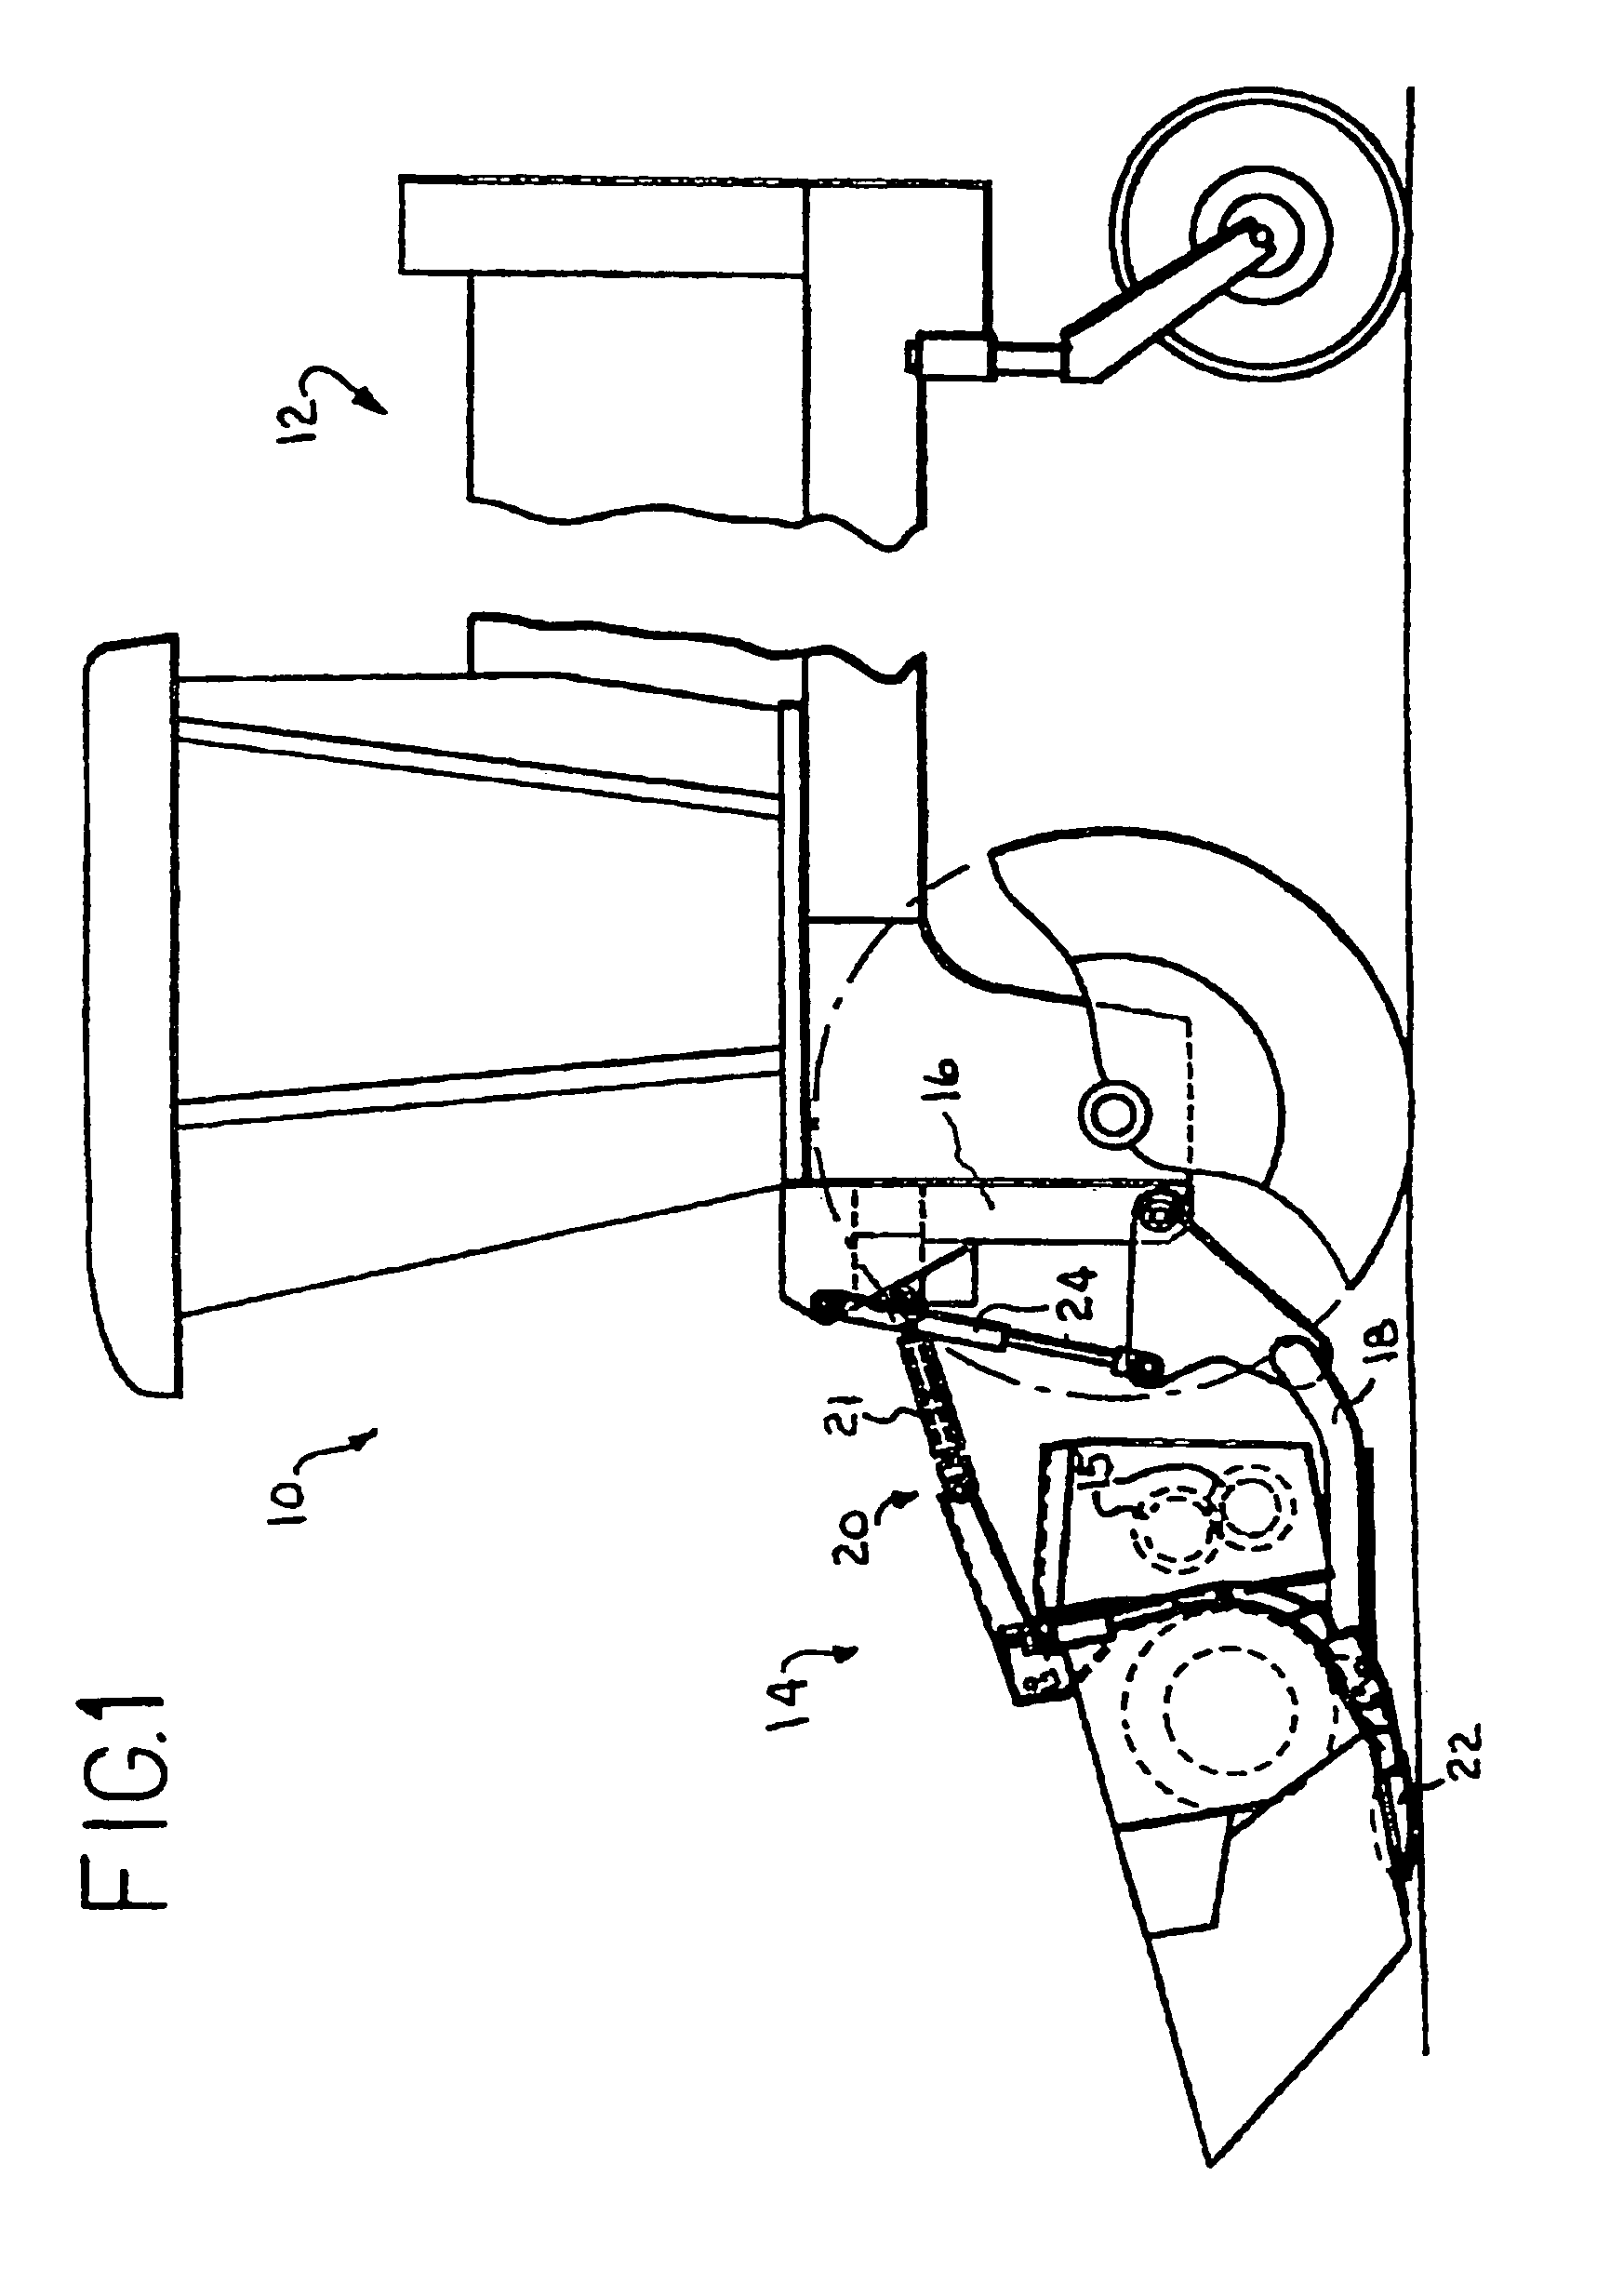 System and method for managing the electrical control system of a windrower header flotation and lift system